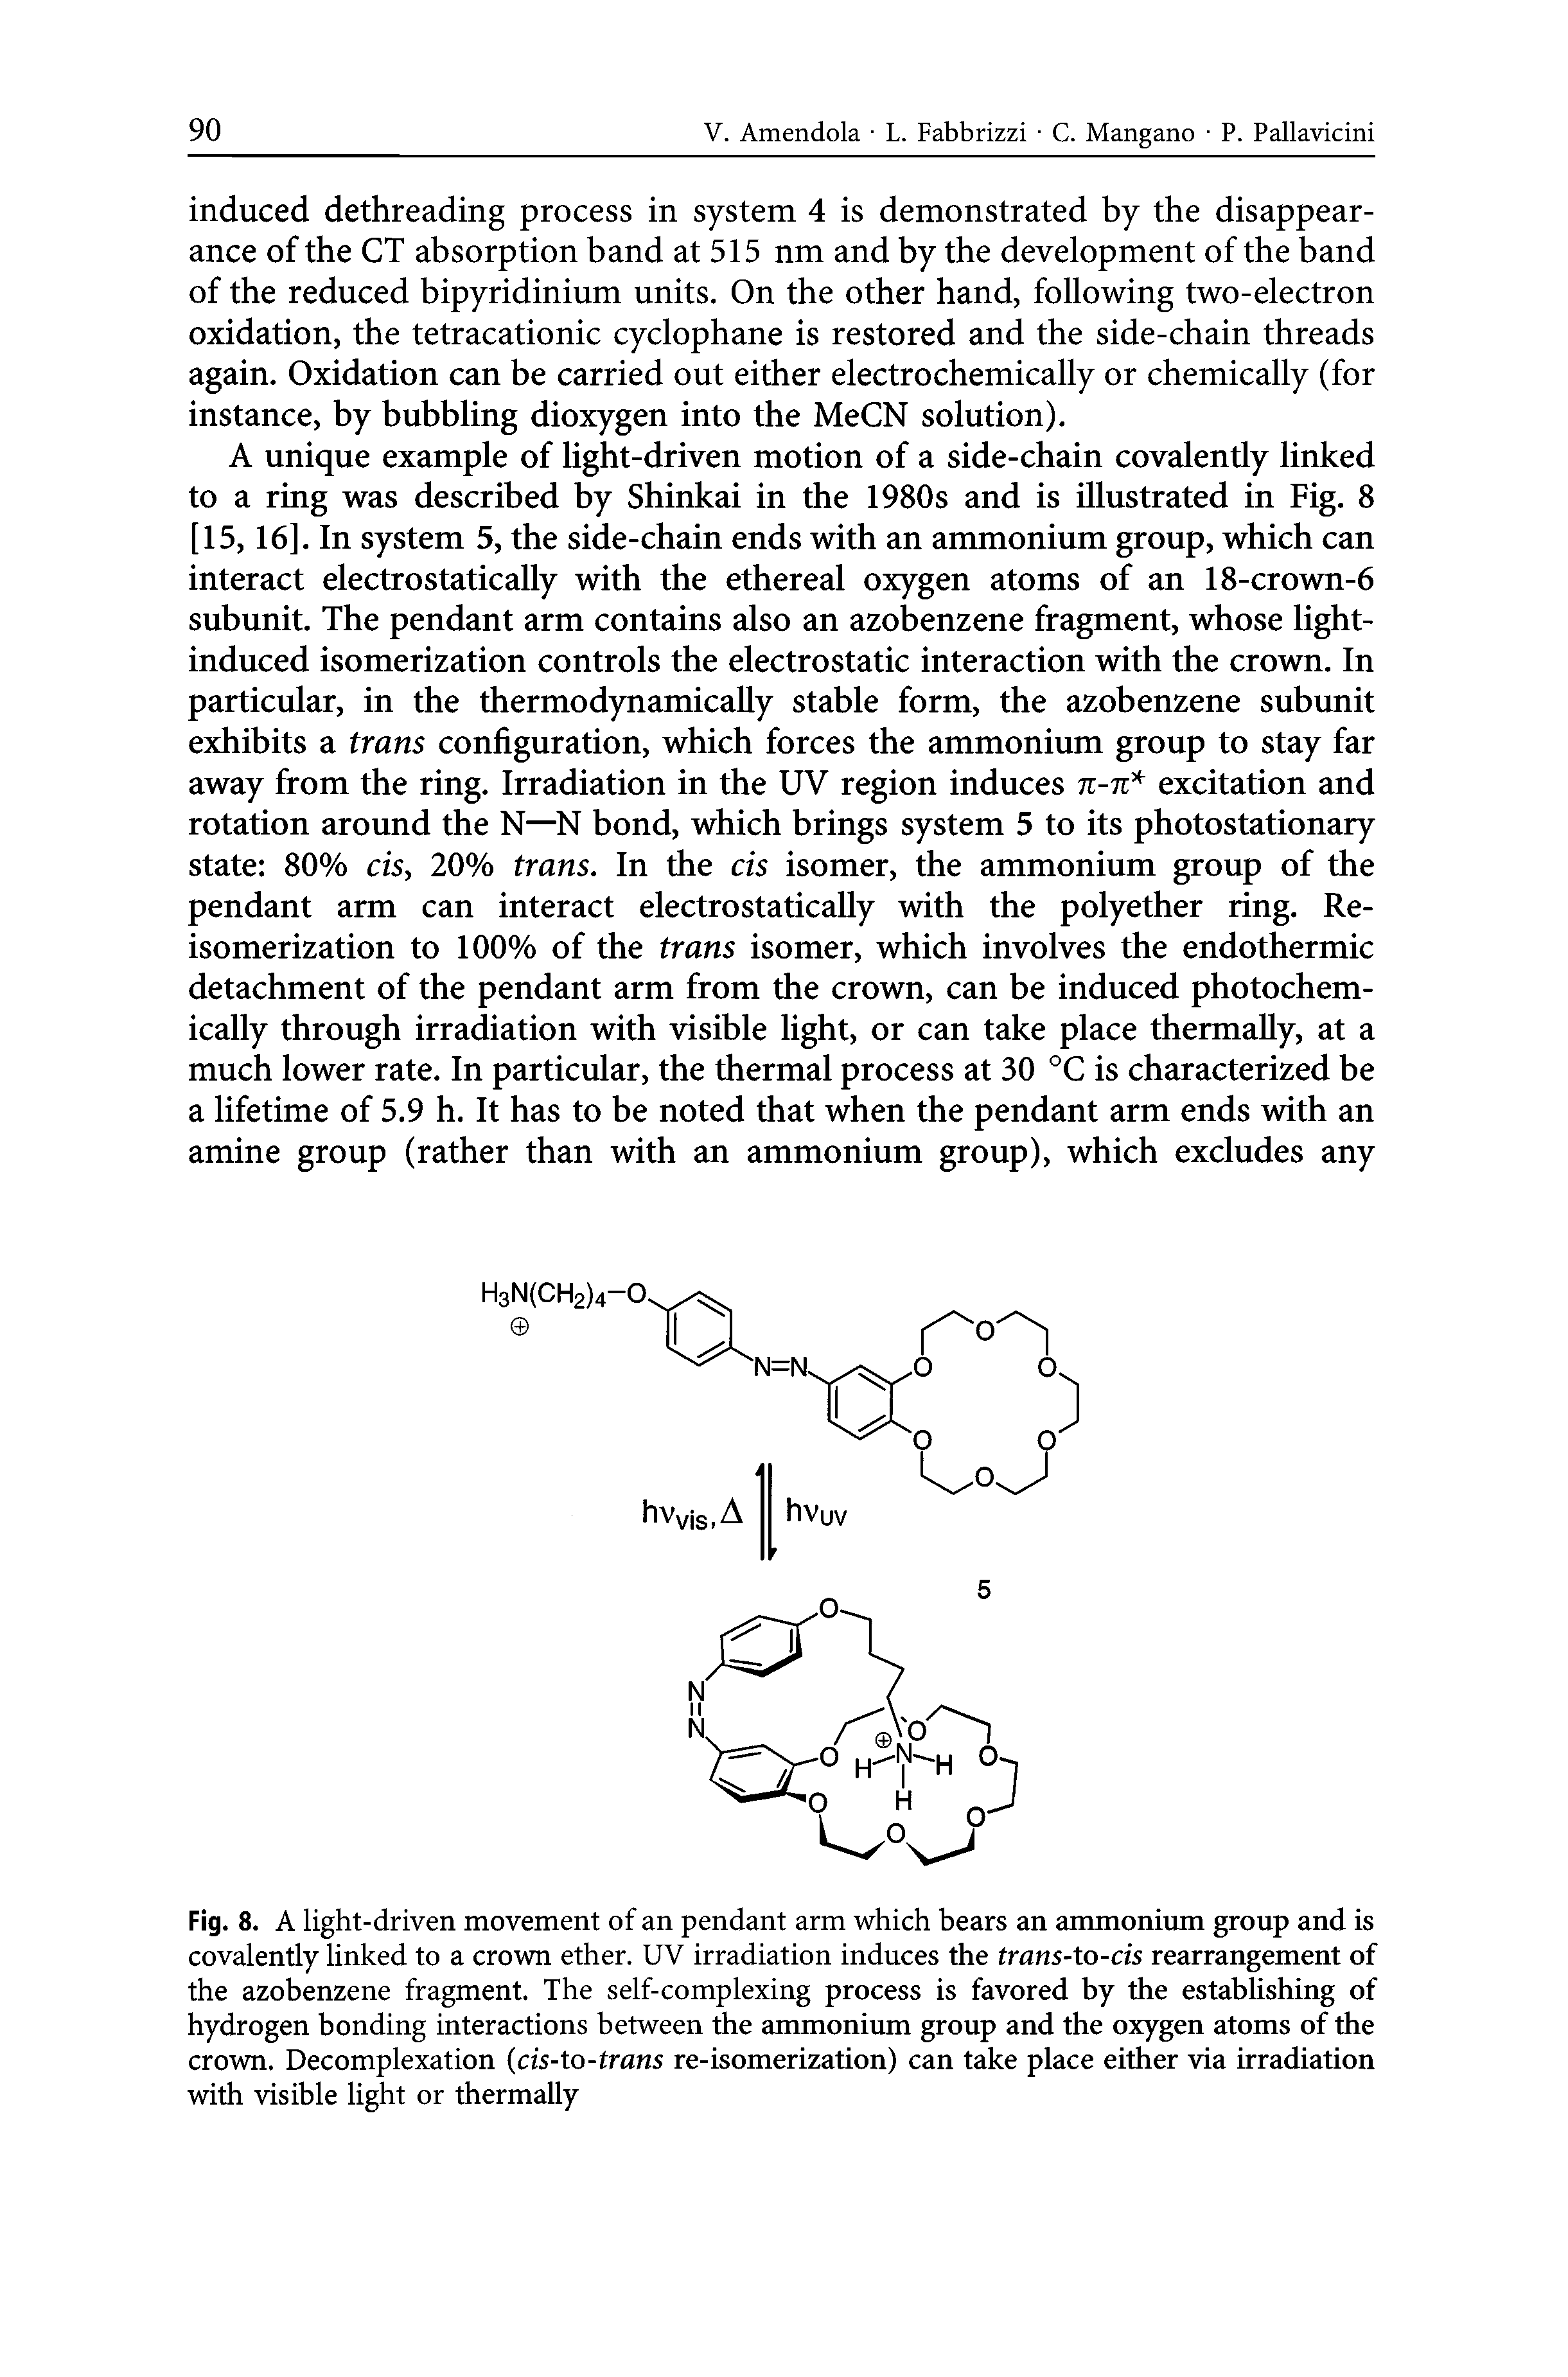 Fig. 8. A light-driven movement of an pendant arm which bears an ammonium group and is covalently linked to a crown ether. UV irradiation induces the trans-to-cis rearrangement of the azobenzene fragment. The self-complexing process is favored by the establishing of hydrogen bonding interactions between the ammonium group and the oxygen atoms of the crown. Decomplexation (cis-to-trans re-isomerization) can take place either via irradiation with visible light or thermally...